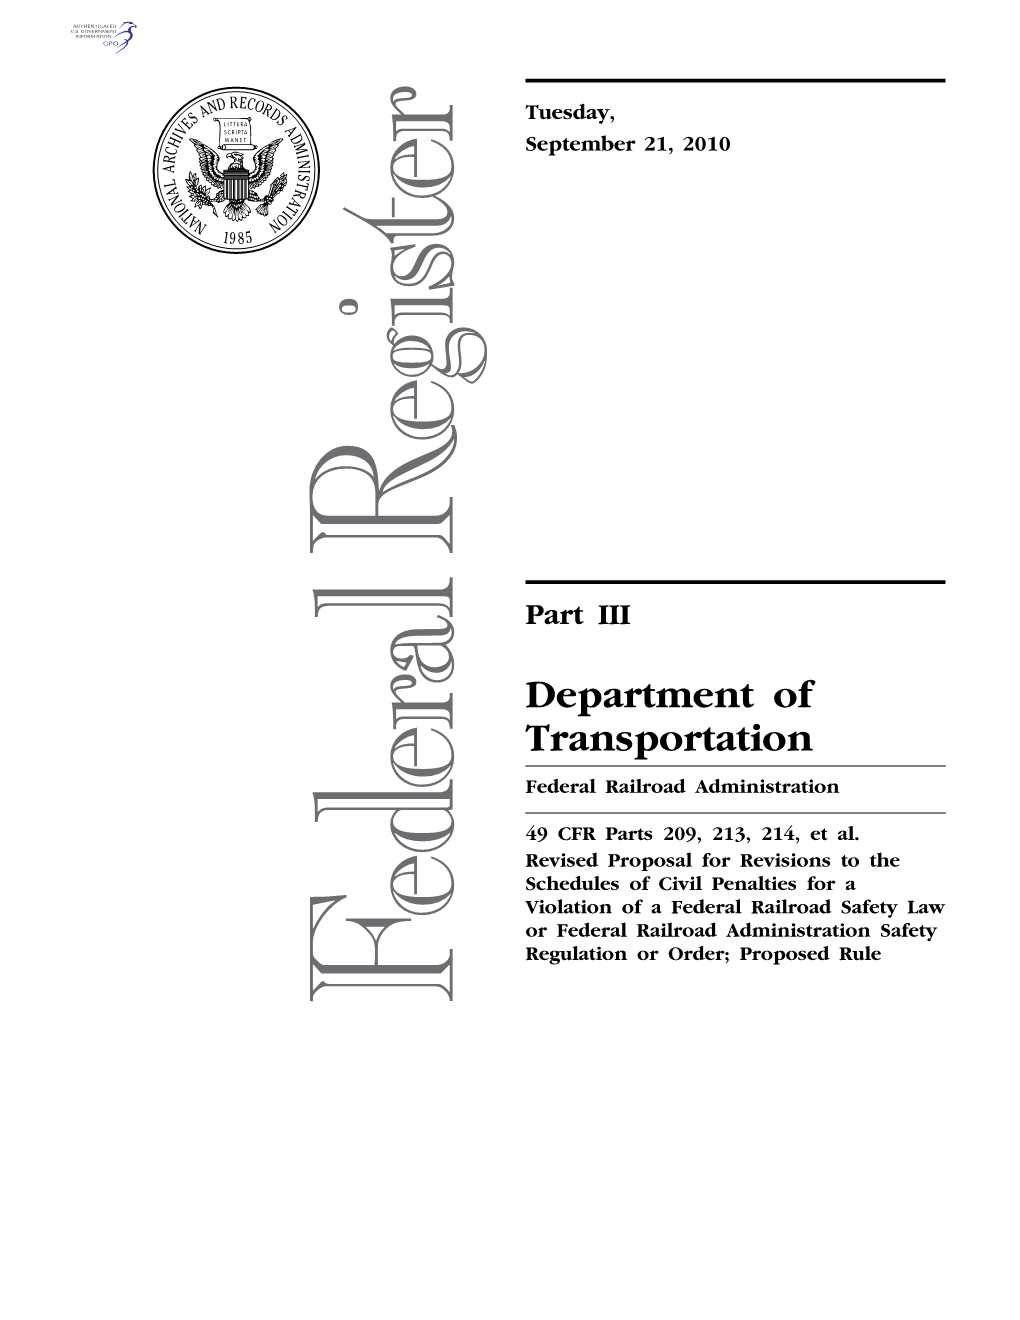 Department of Transportation Federal Railroad Administration